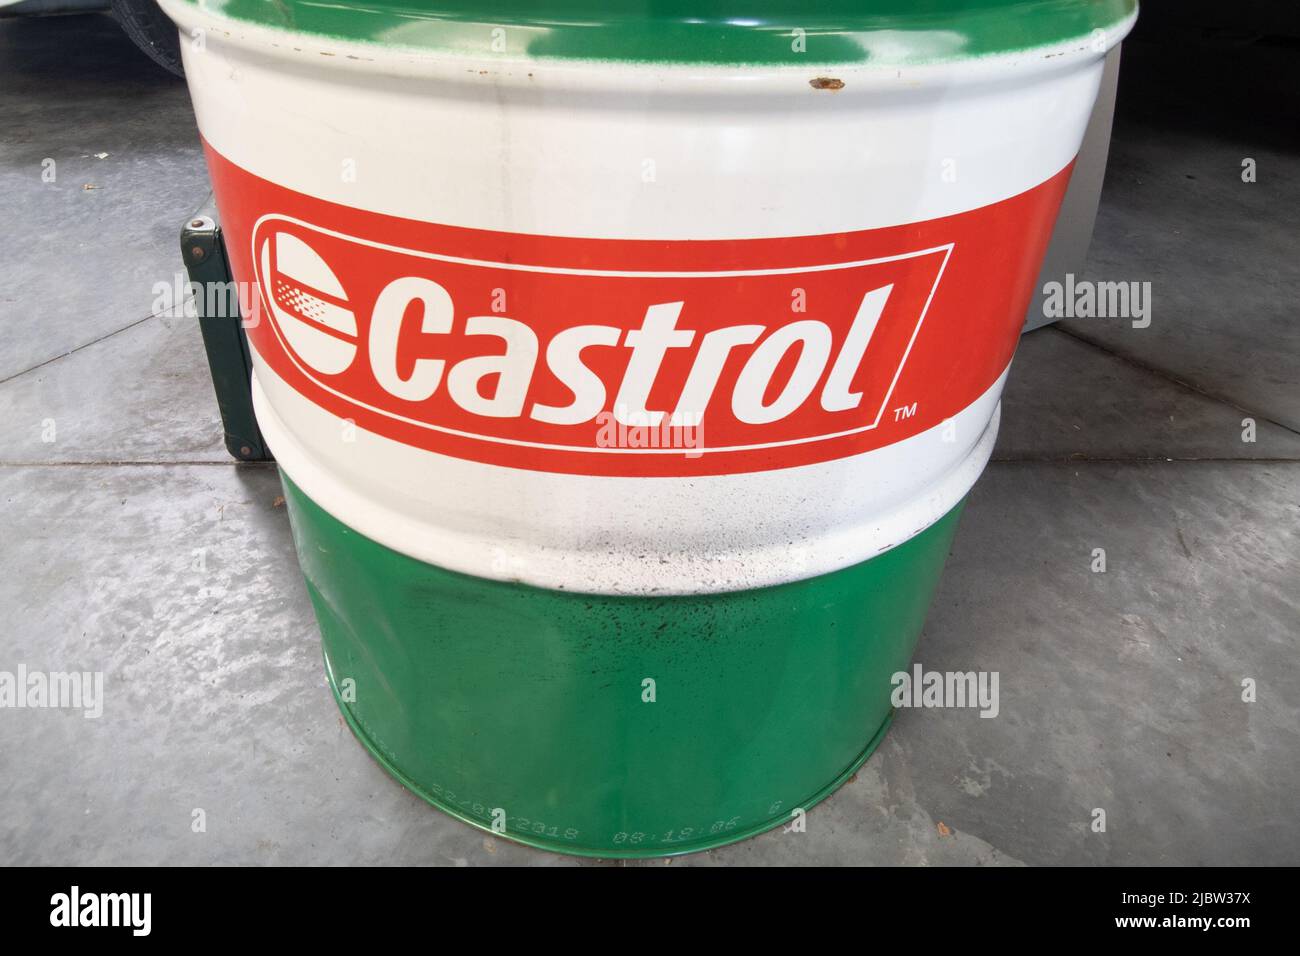 Bordeaux , Aquitaine  France - 05 17 2022 : Castrol logo text and sign British global brand on barrel of oil industrial automotive lubricants Stock Photo